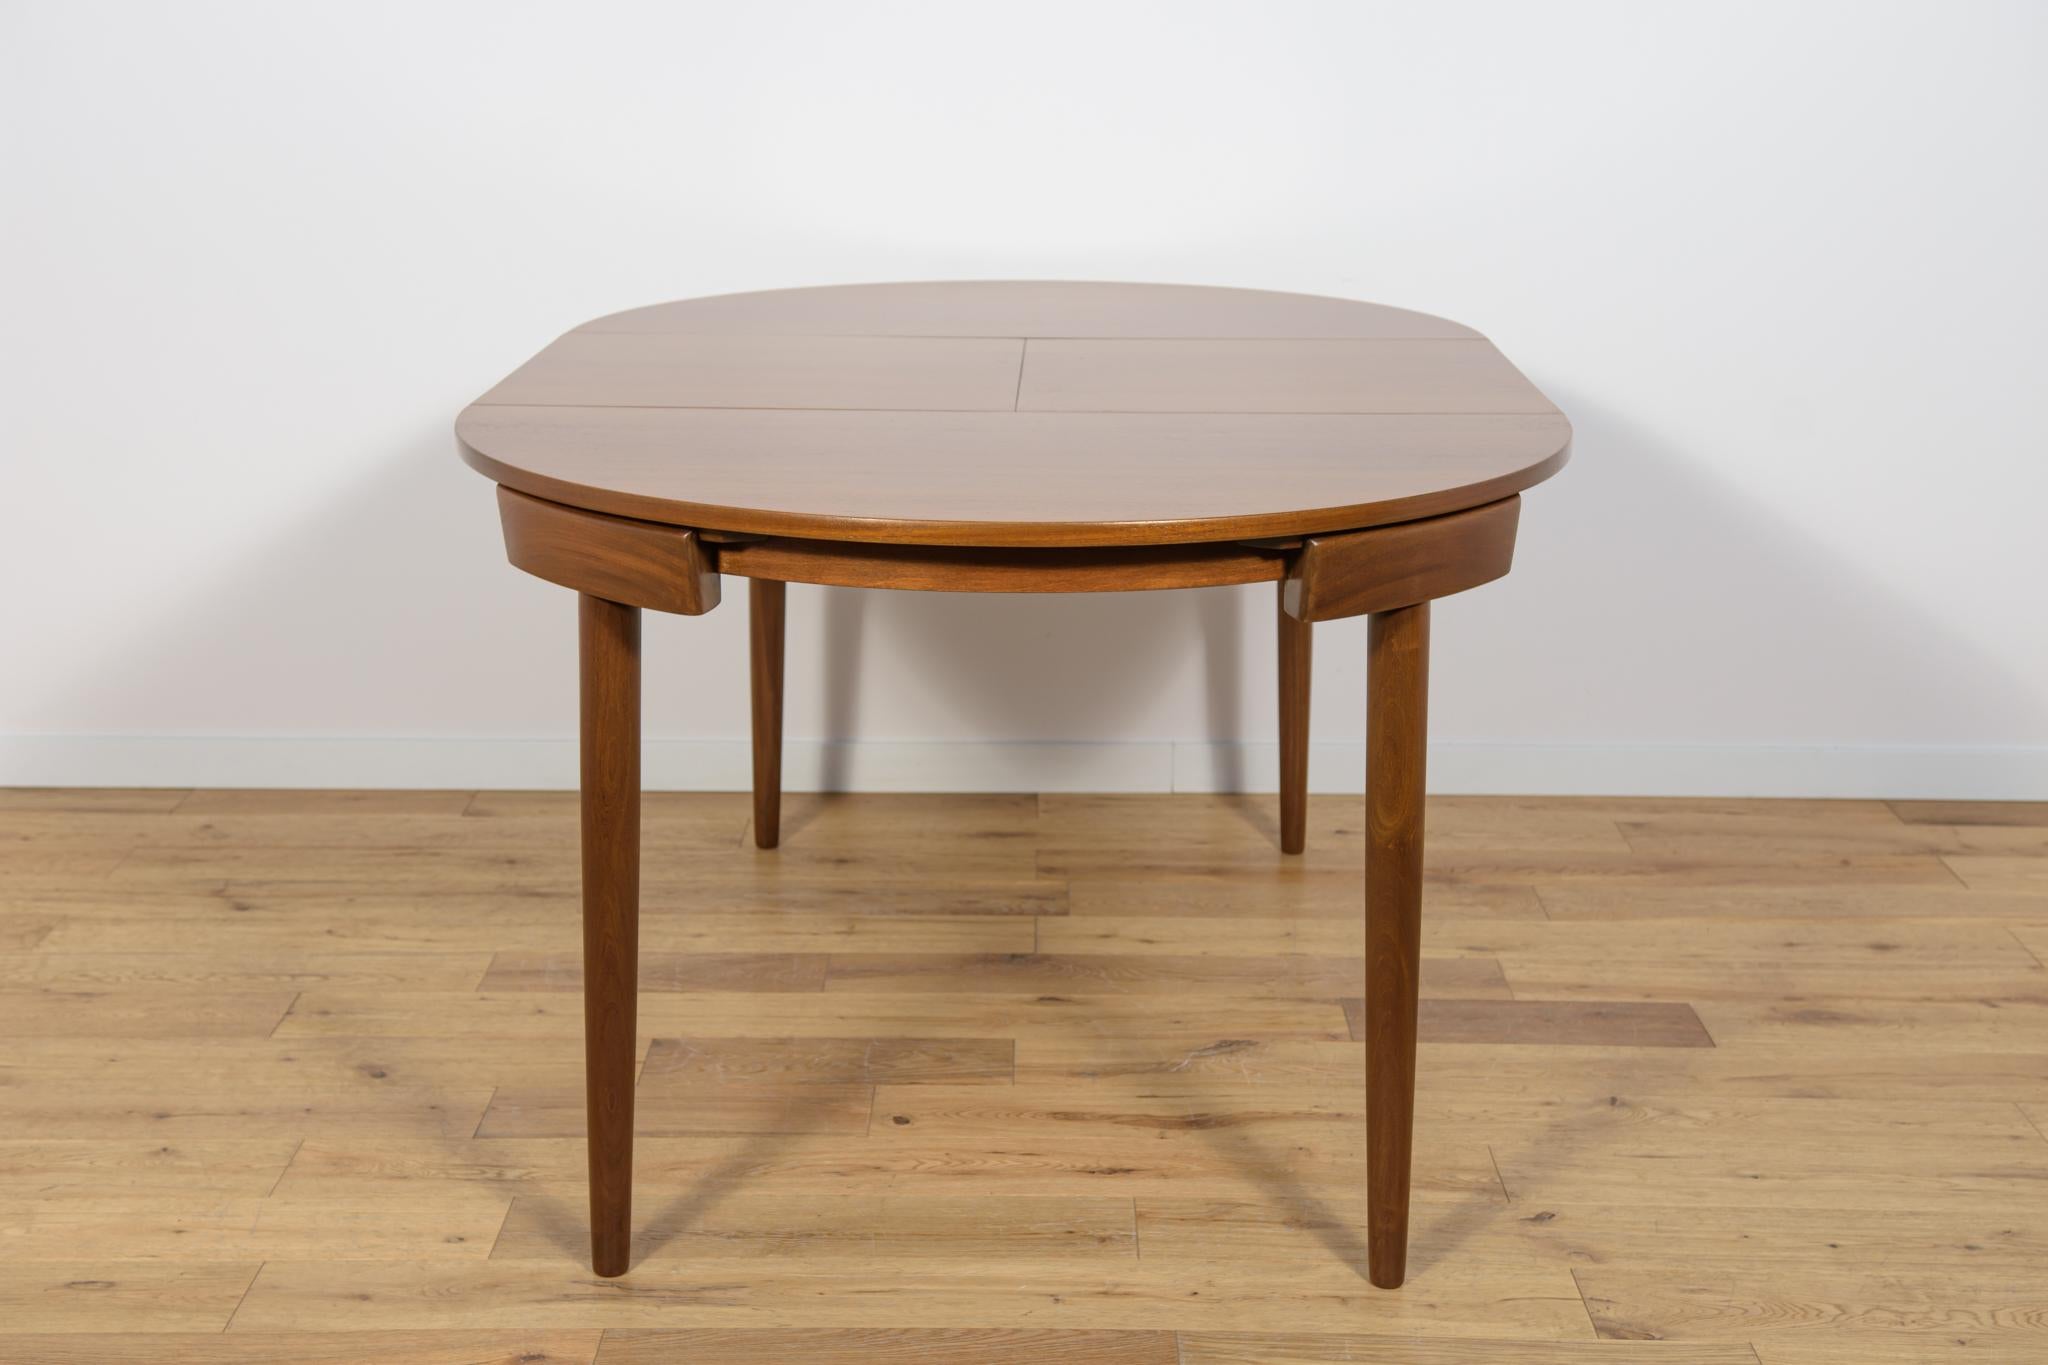  Mid-Century Teak Dining Table and Chairs Set by Hans Olsen for Frem Røjle. For Sale 10